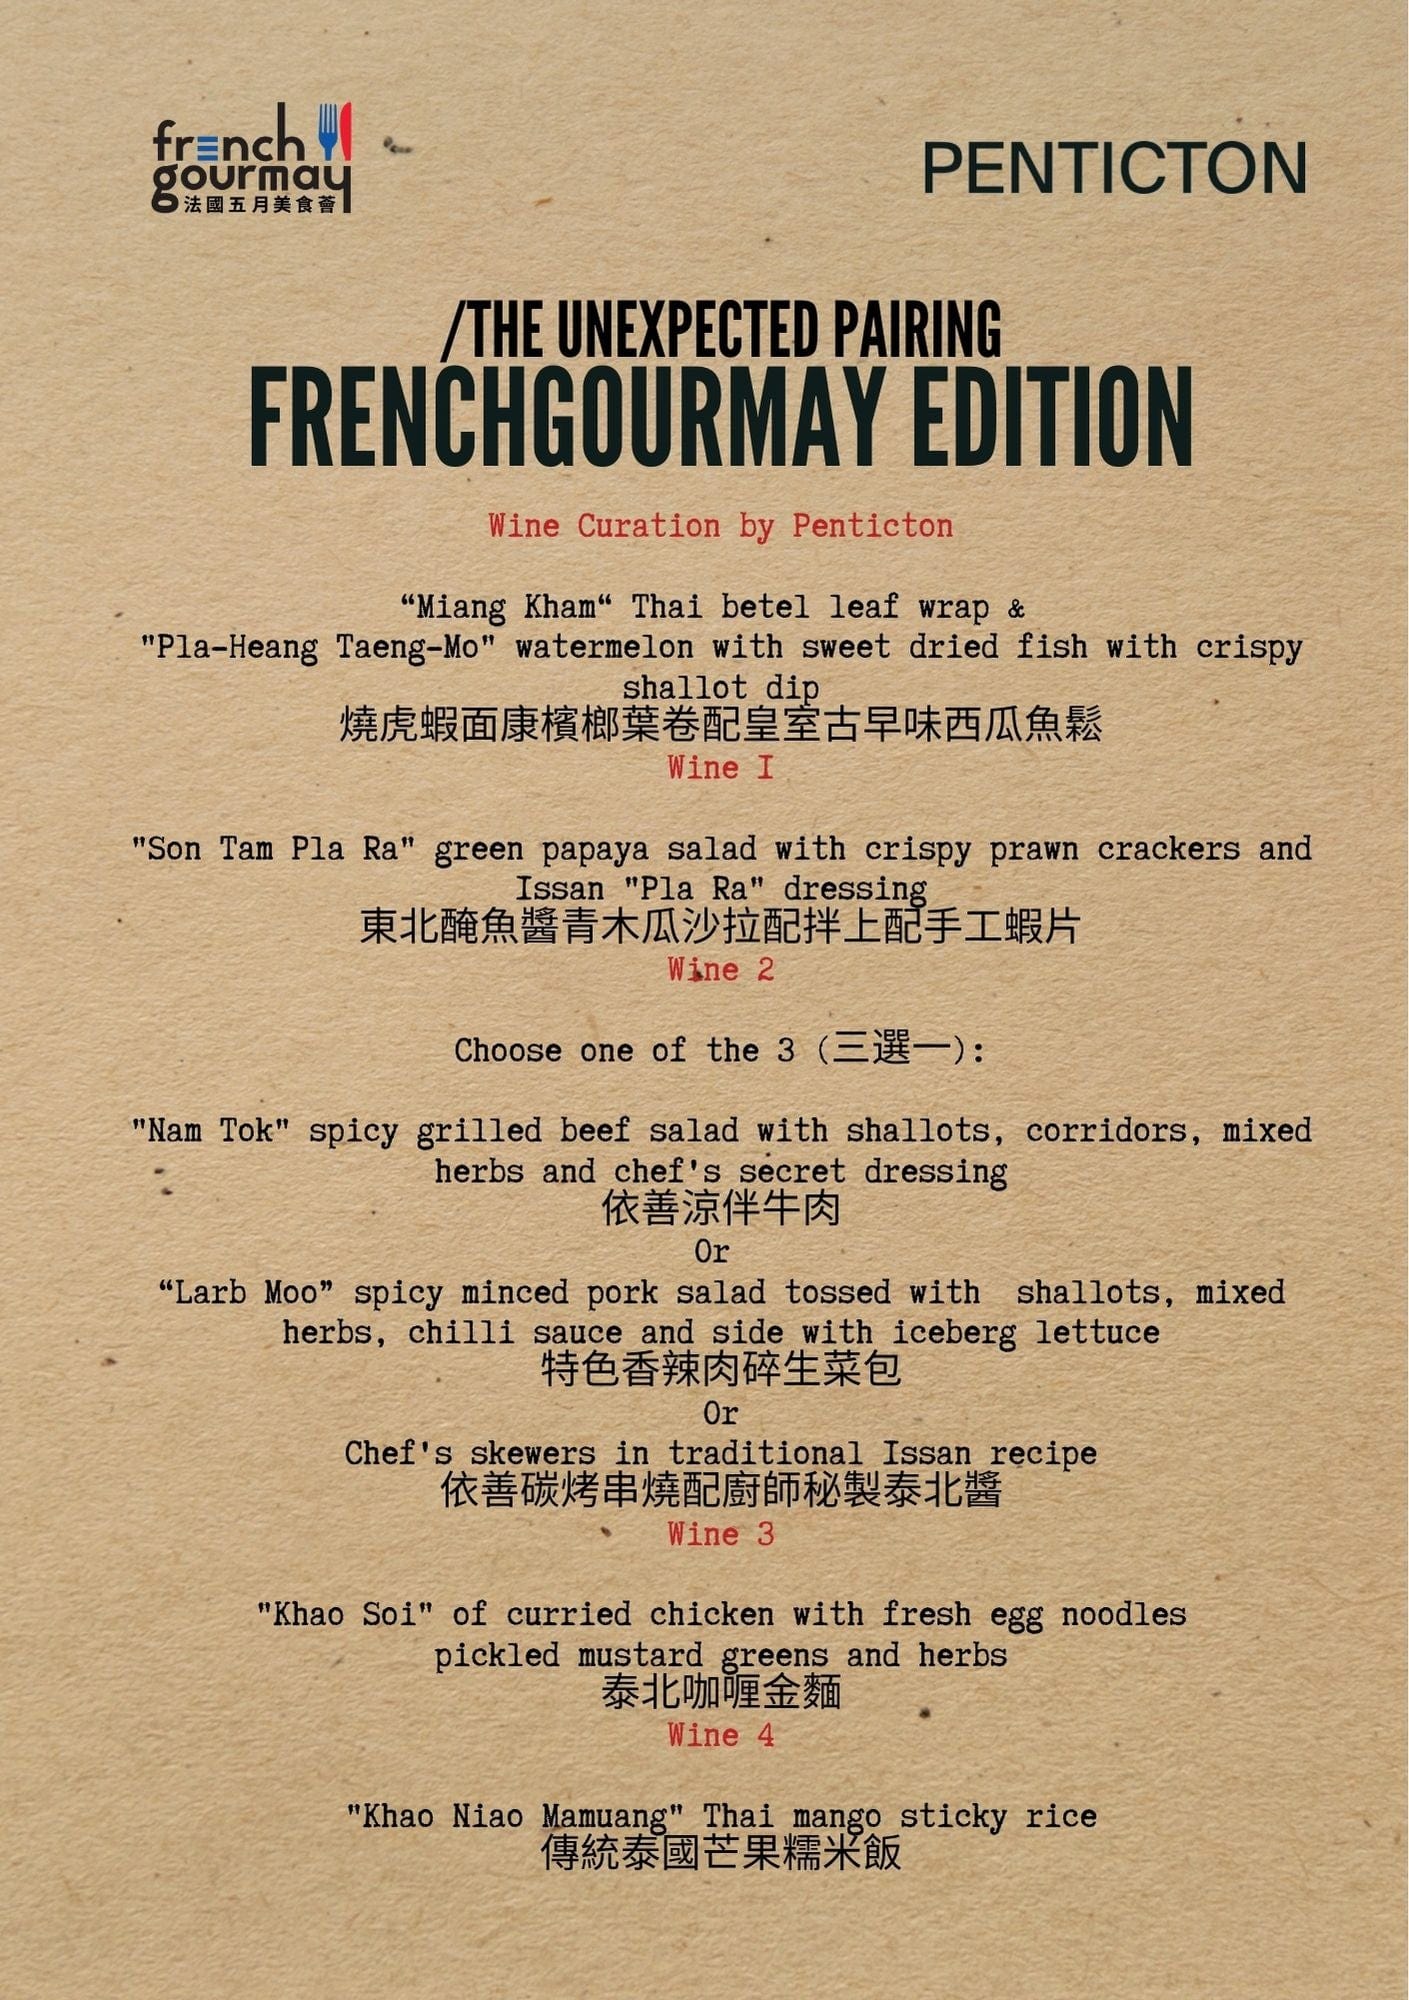 Shop PENTICTON French GourMay Edition Rhone Wine & More Wine Pairing【尋味法國】泰國依善料理 X Rhone Valley & More 餐酒會 online at PENTICTON artisanal French wine store in Hong Kong. Discover other French wines, promotions, workshops and featured offers at pentictonpacific.com 